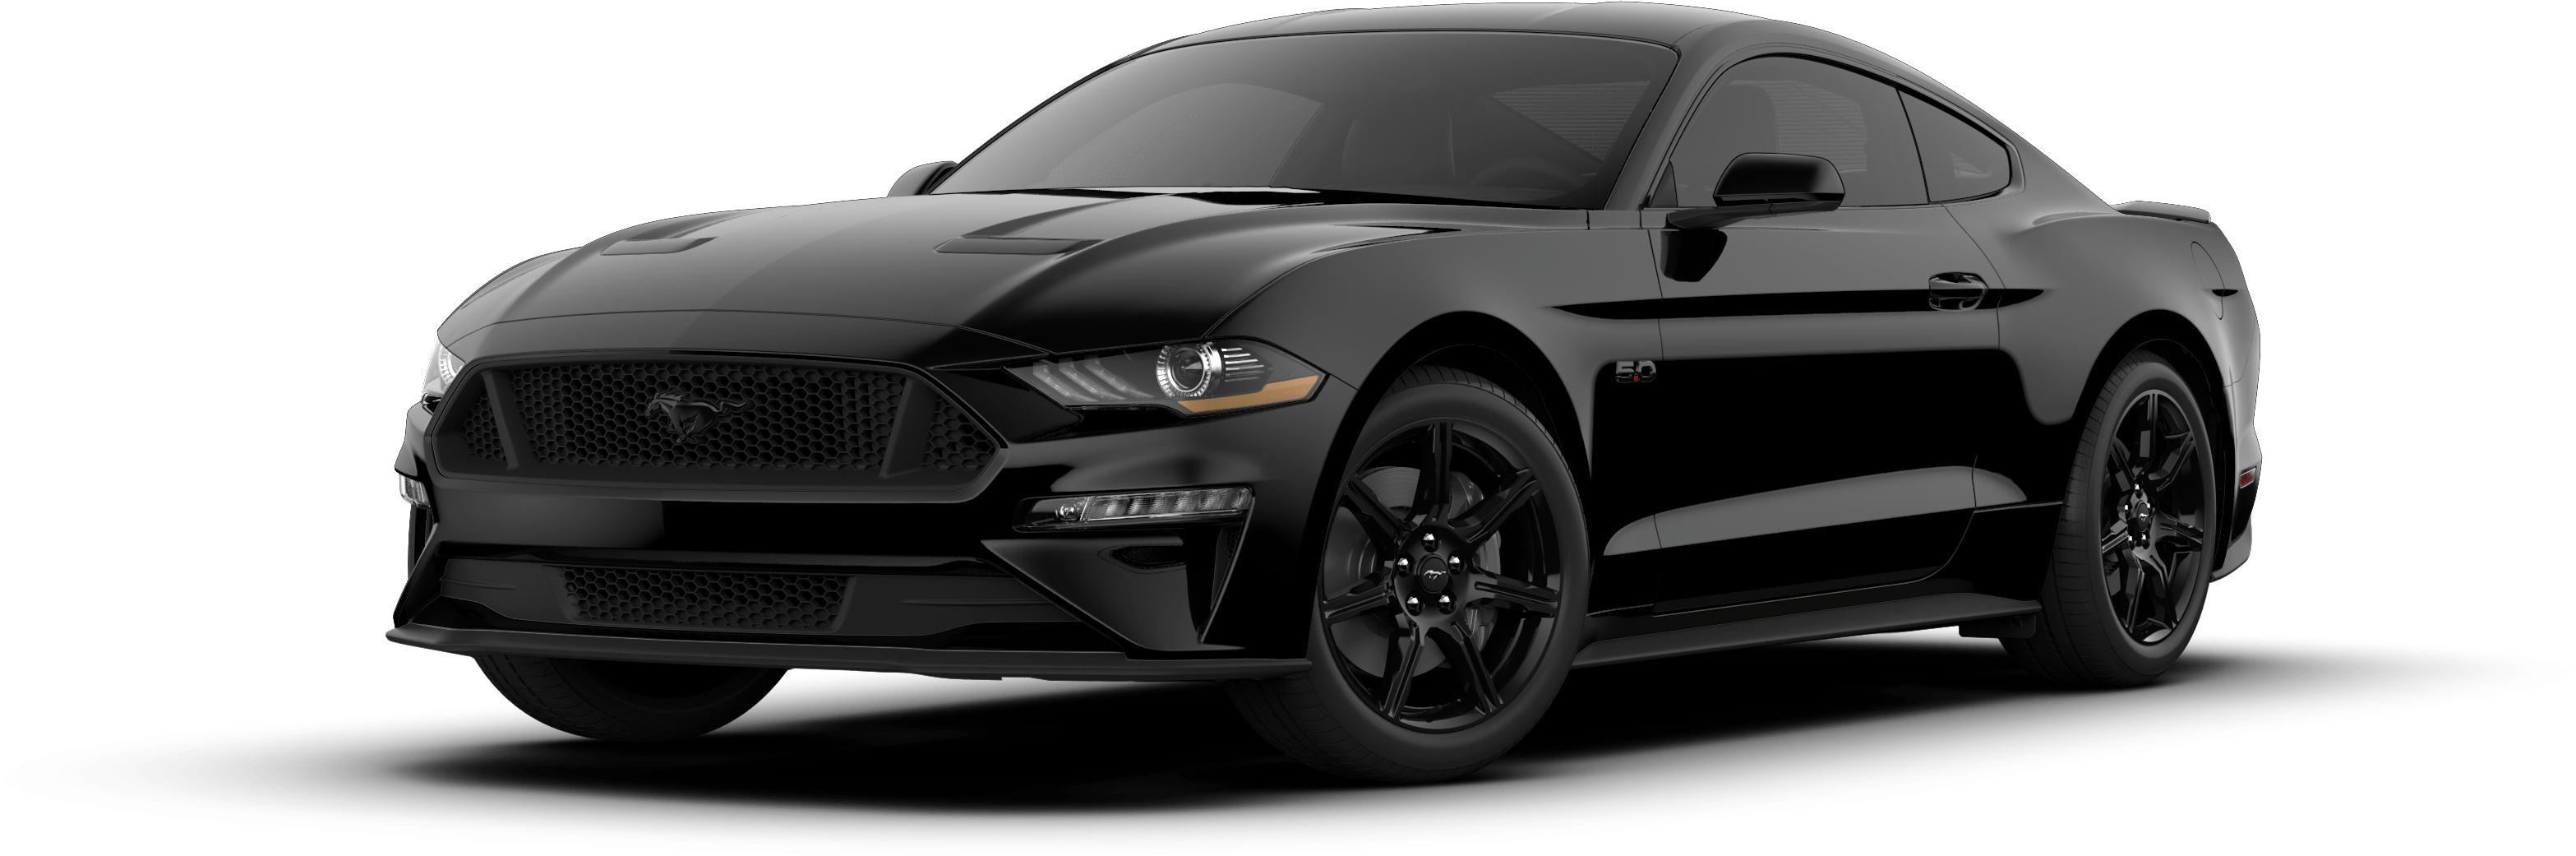 Black Ford Mustang G T Side View PNG image